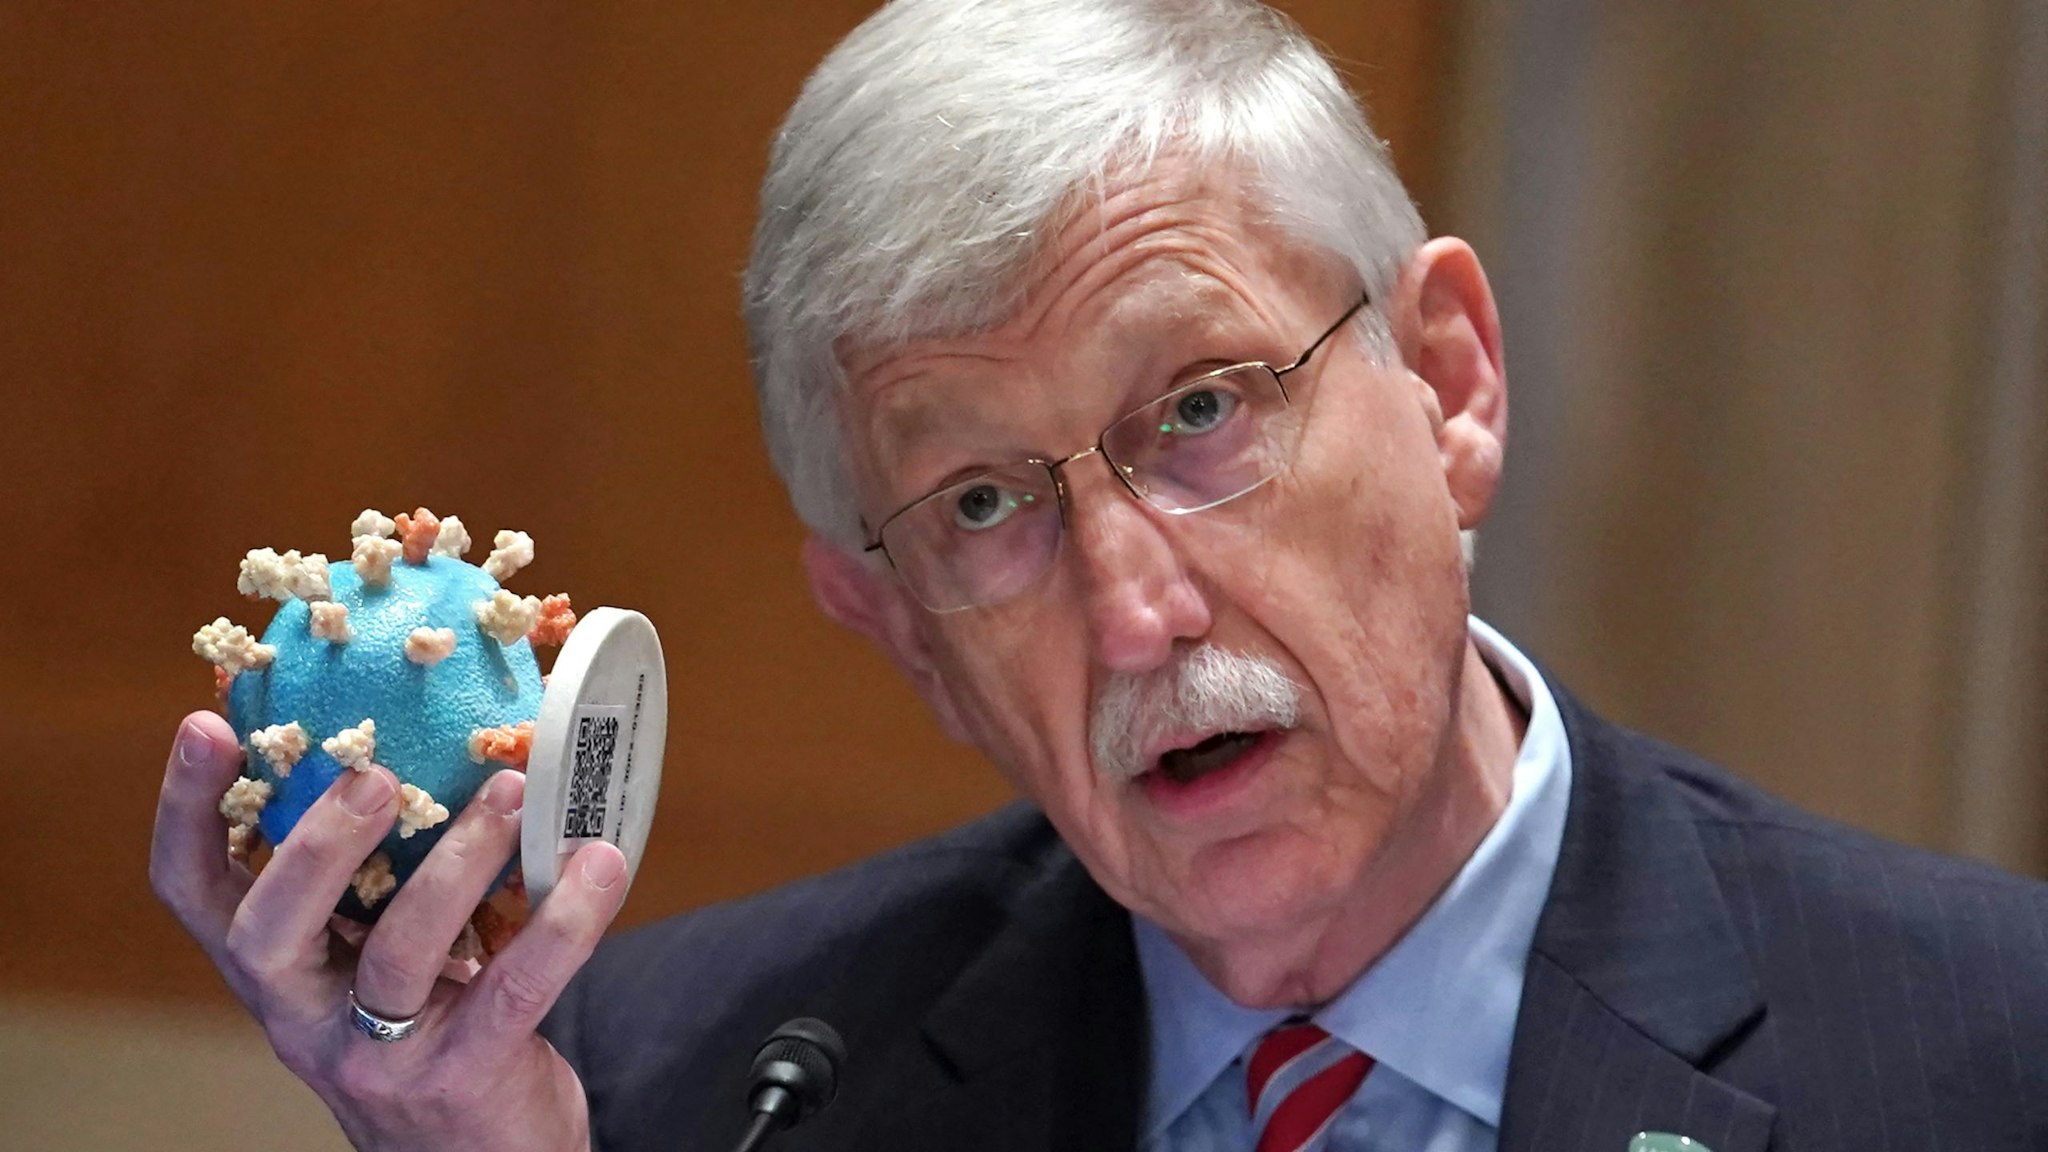 NIH Director Fr. Francis Collins holds up a model of the coronavirus as he testifies before a hearing looking into the budget estimates for National Institute of Health (NIH) and the state of medical research on Capitol Hill in Washington, DC on May 26, 2021.